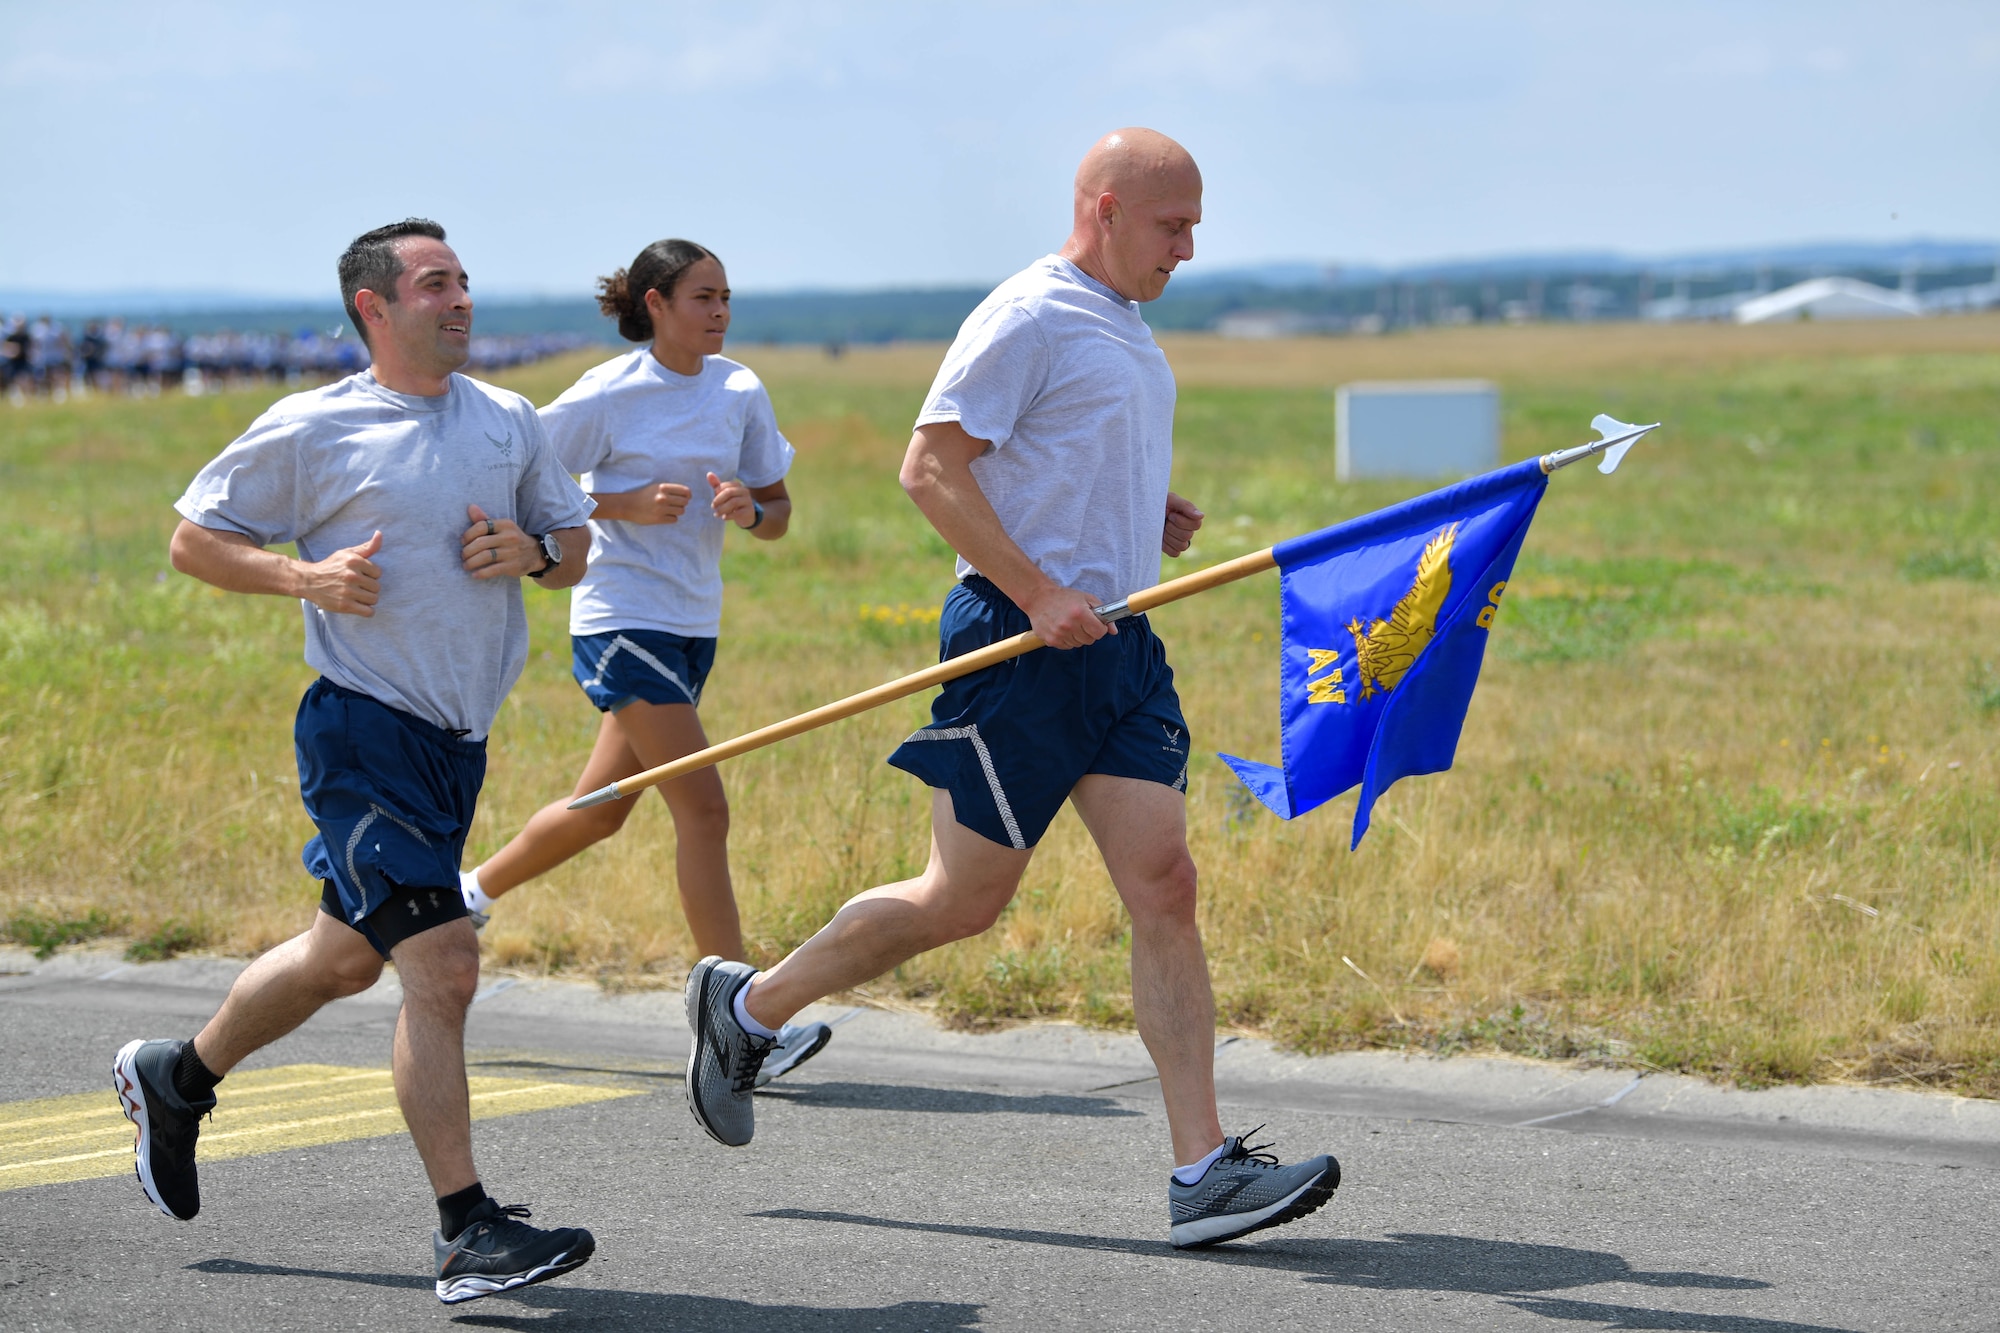 U.S. Air Force Brig. Gen. Josh Olson, 86th Airlift Wing commander, right, runs with 86 AW Airmen during a wing run at Ramstein Air Base, Germany, June 29, 2022.